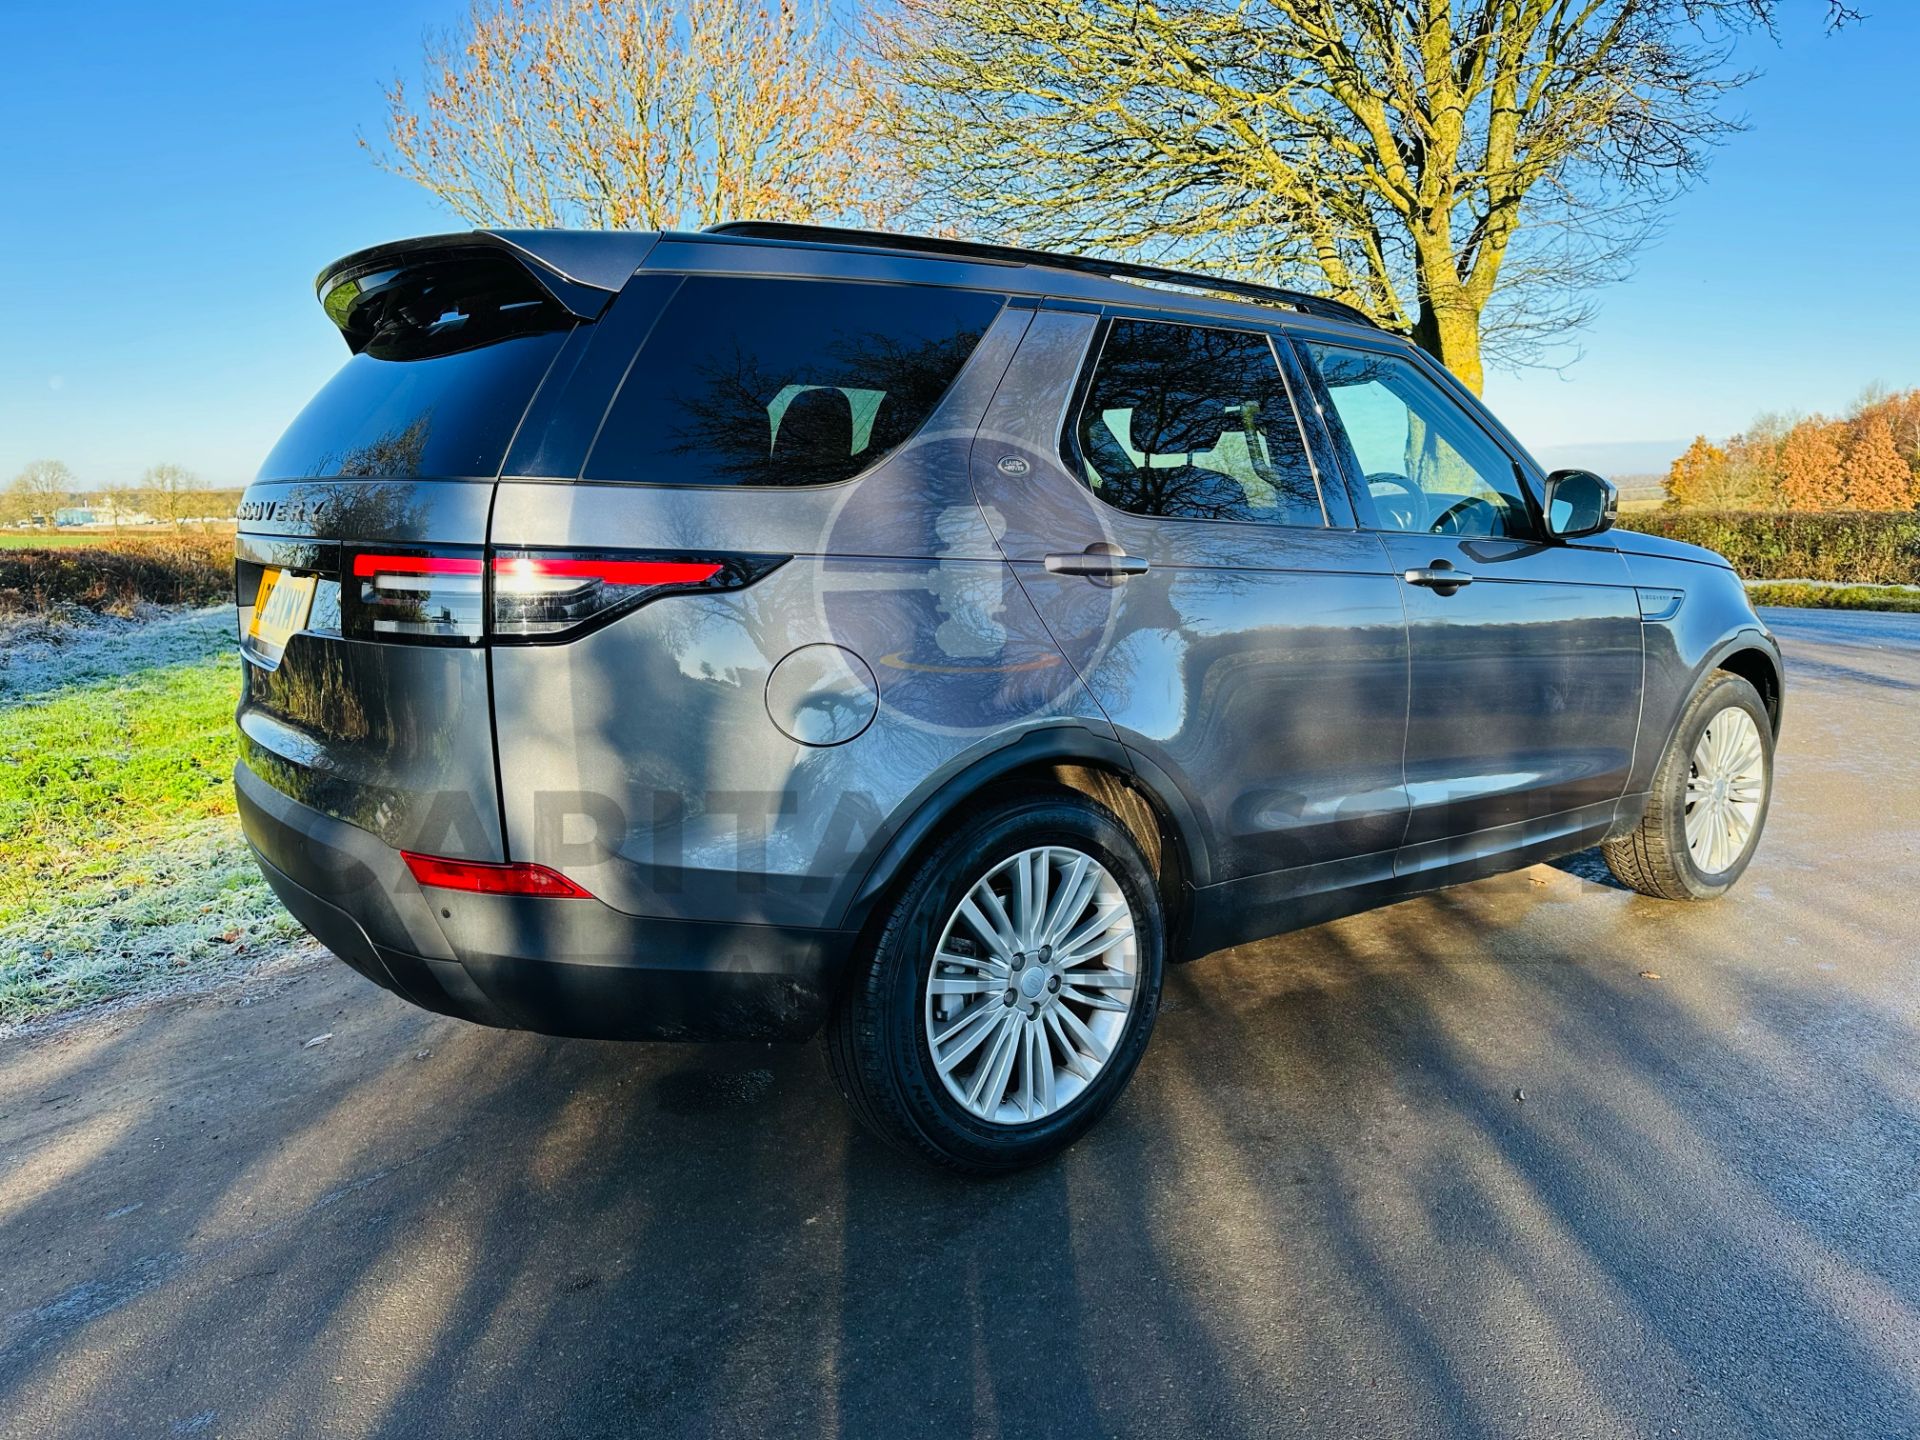 (ON SALE) LAND ROVER DISCOVERY 5 "AUTO DIESEL - 7 SEATER SUV - 2019 MODEL - ONLY 22K MILES FROM NEW - Image 13 of 41